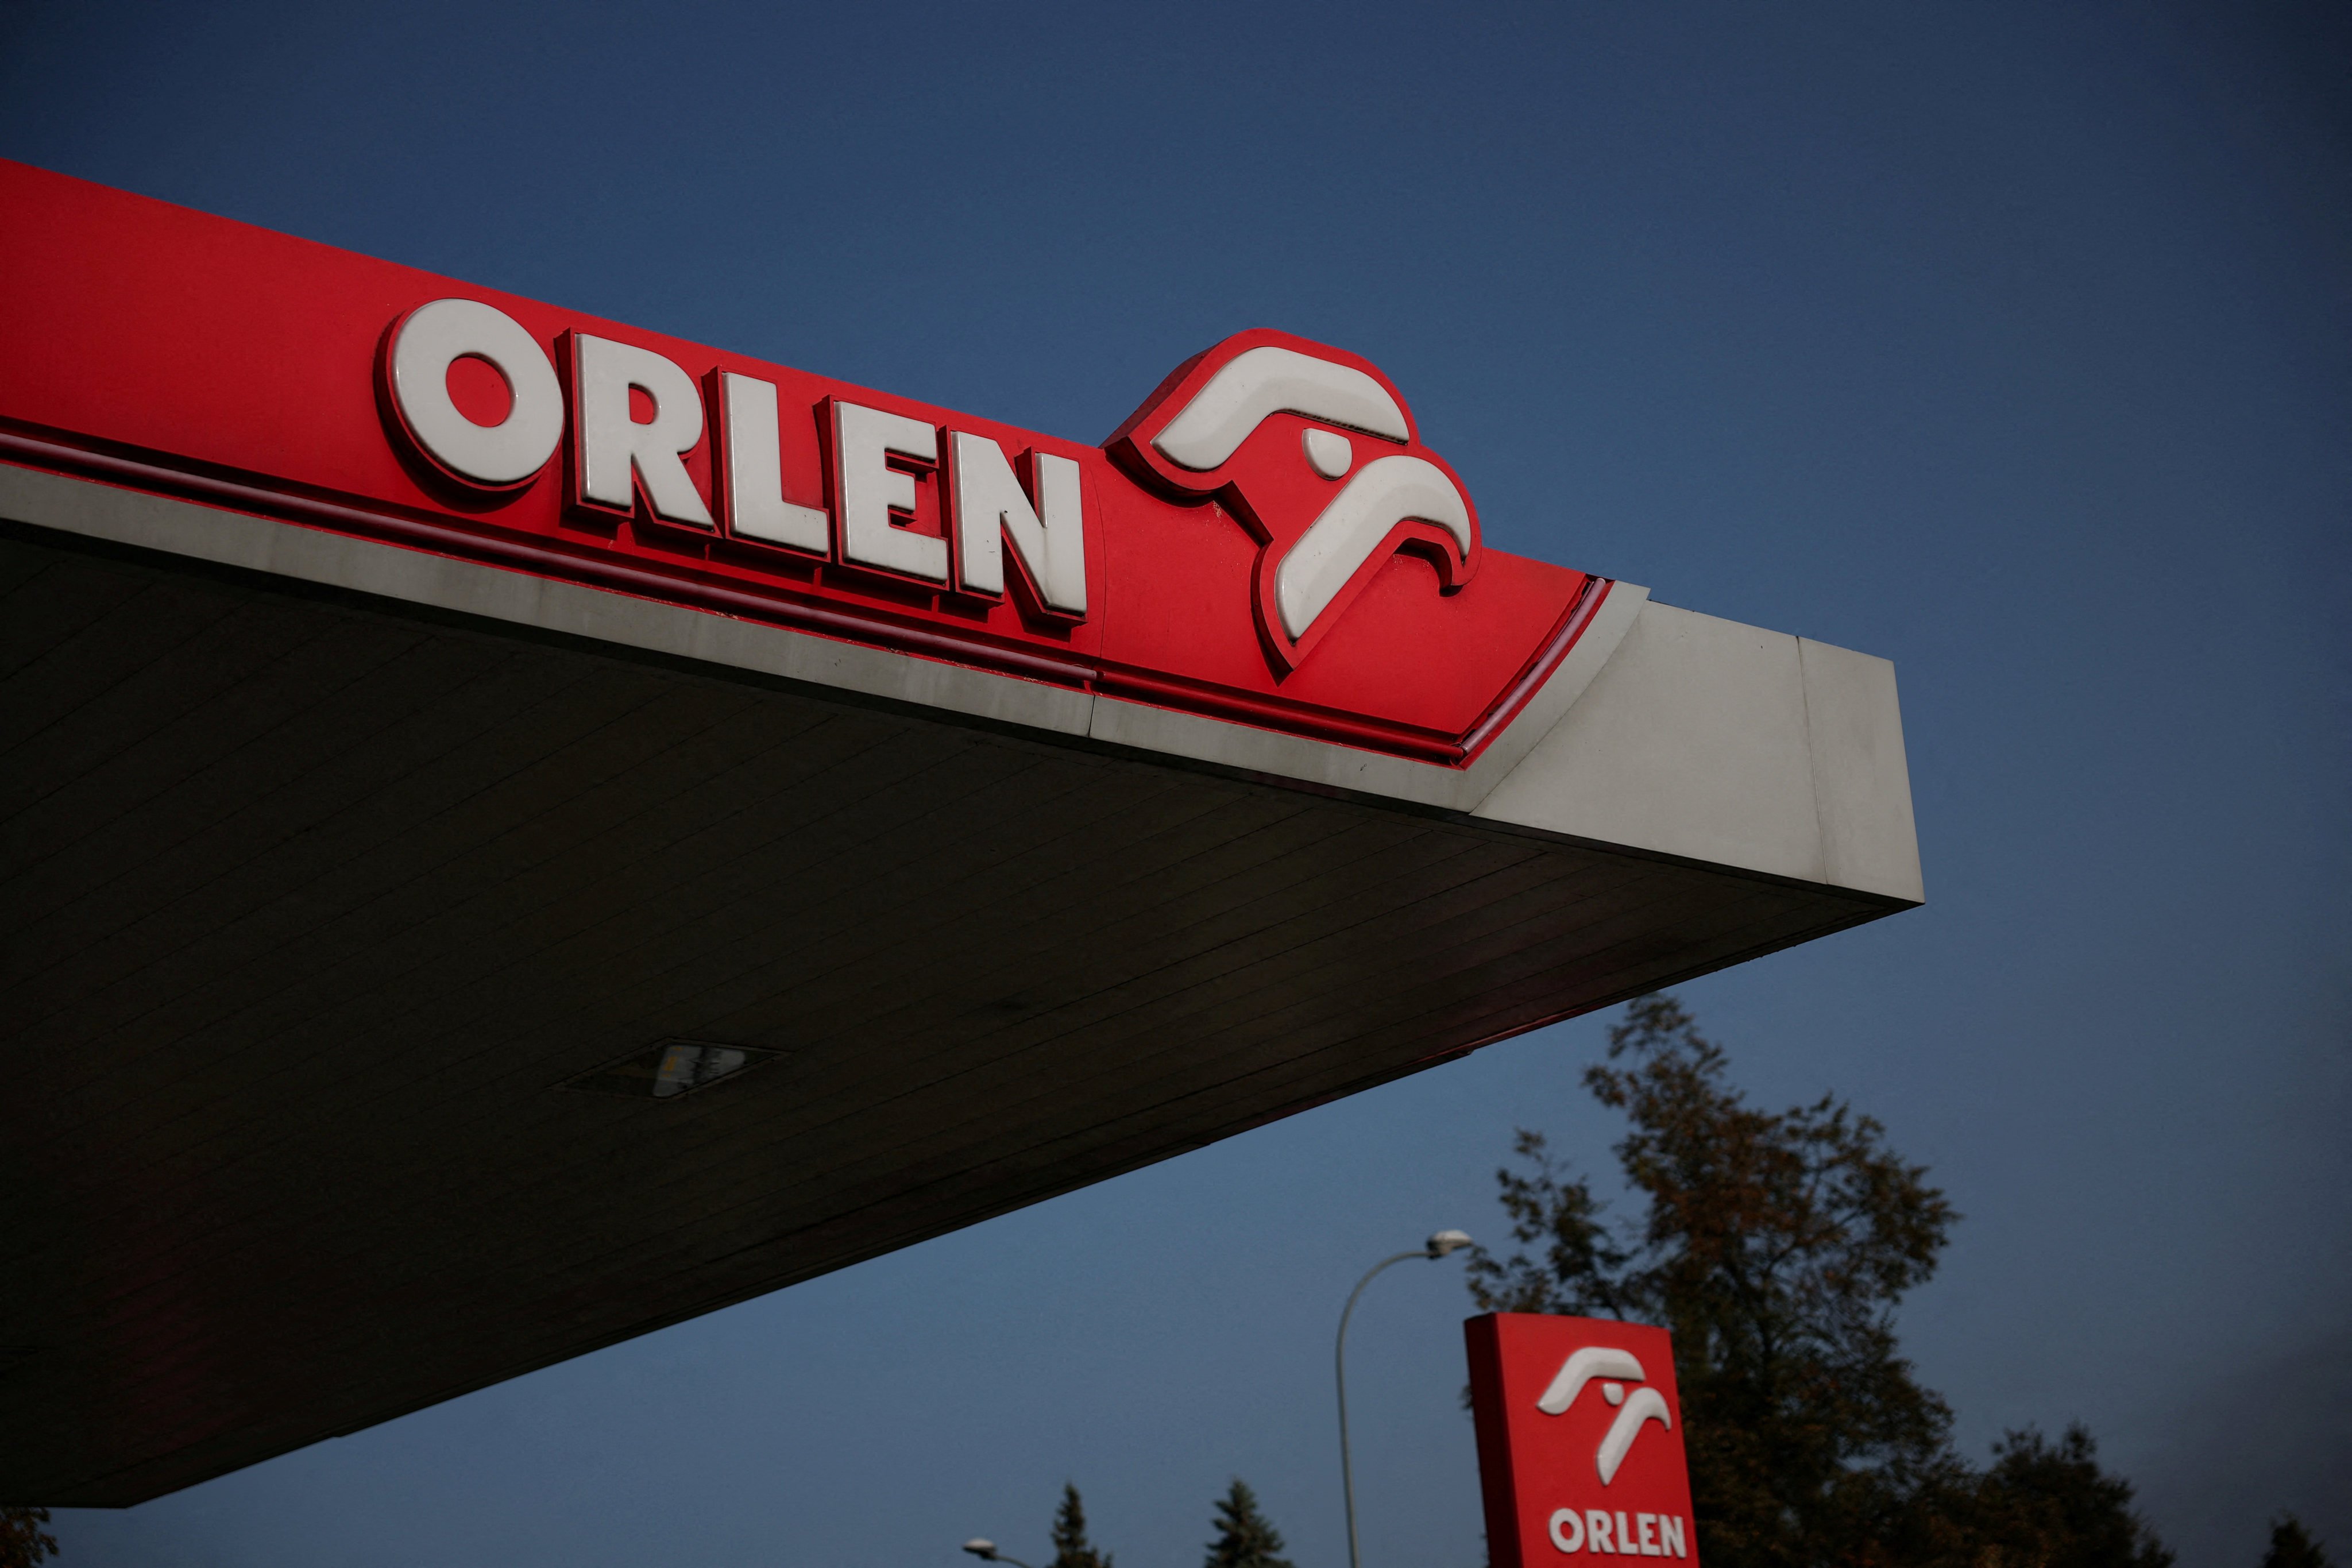 The logo of Polish oil and gas group Orlen is displayed at a petrol station in Bialystok, Poland. Photo: Reuters